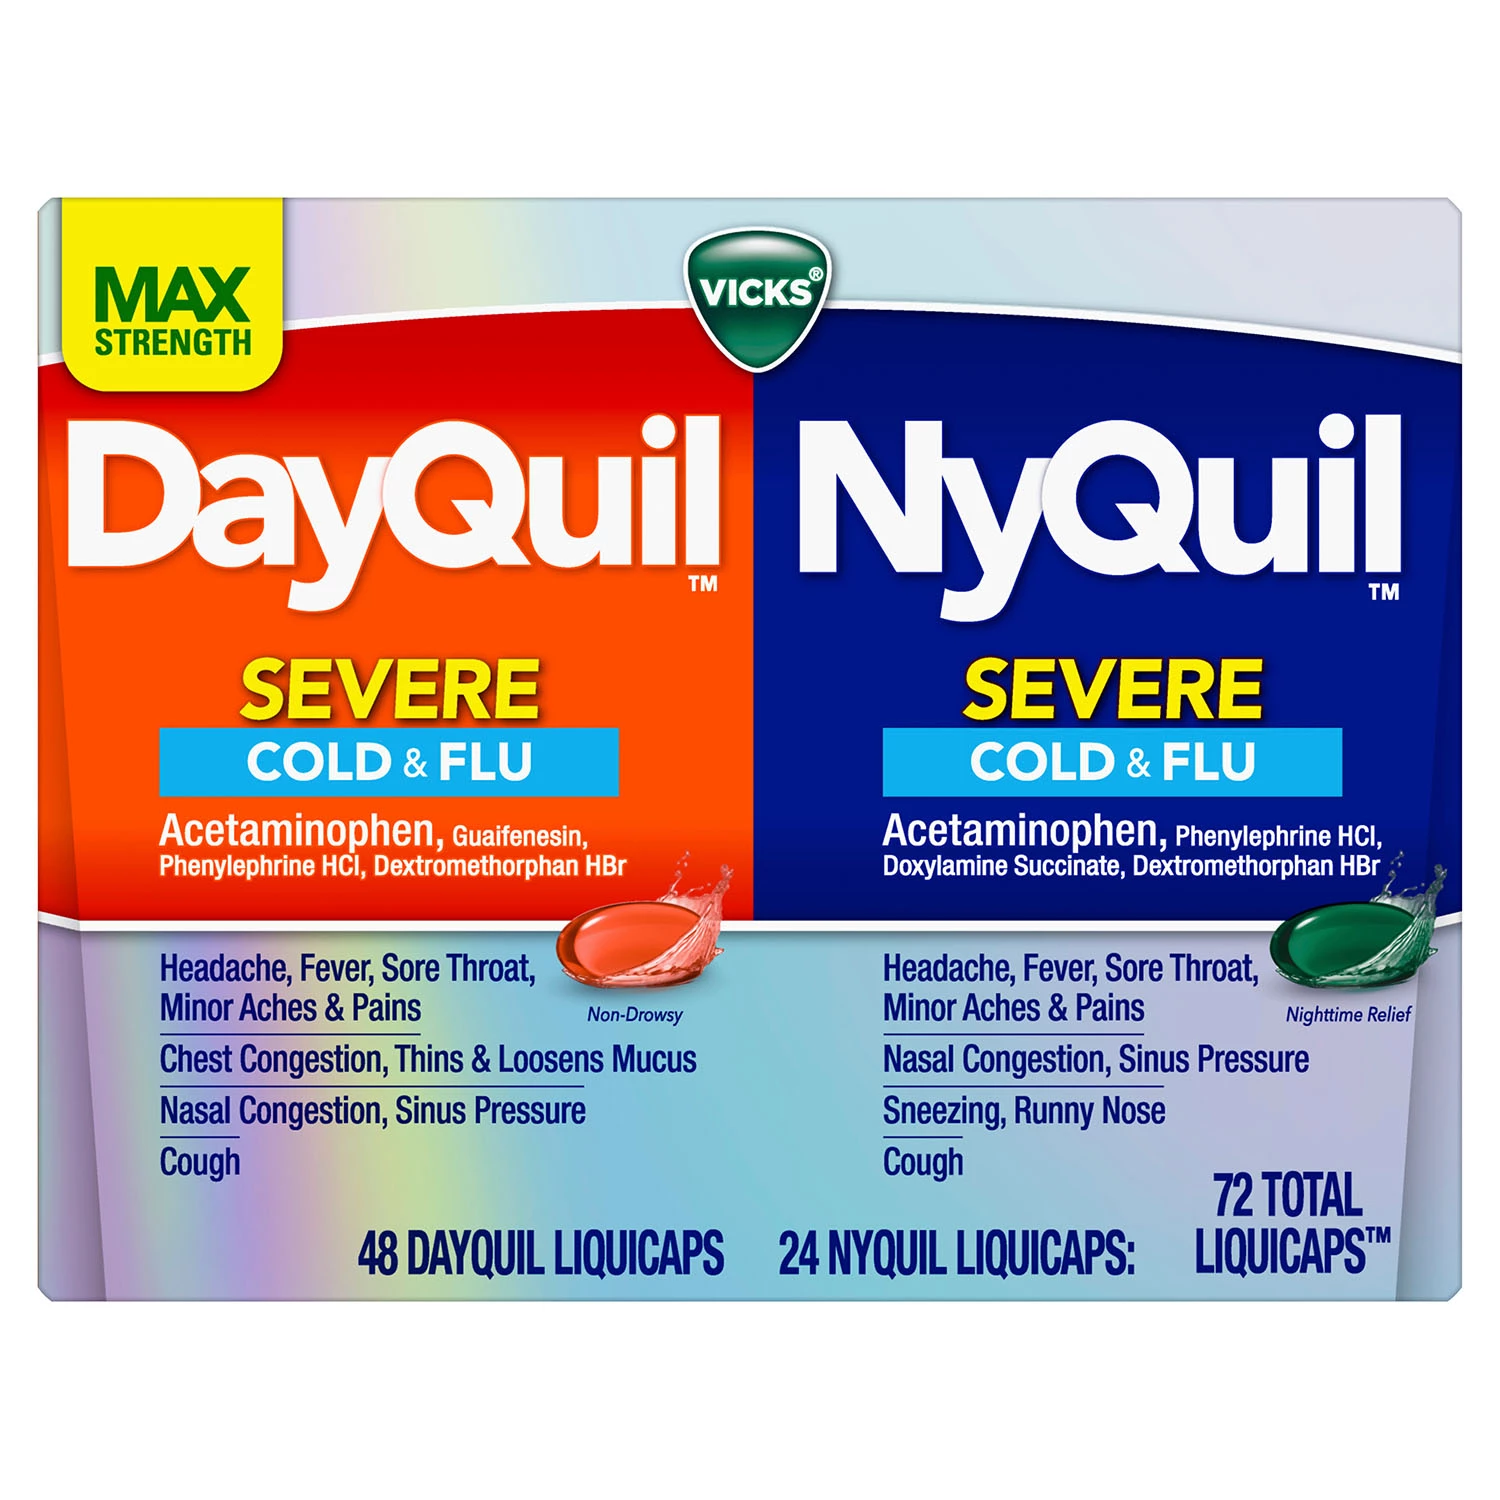 Vicks DayQuil and NyQuil Severe Cold & Flu Relief LiquiCaps